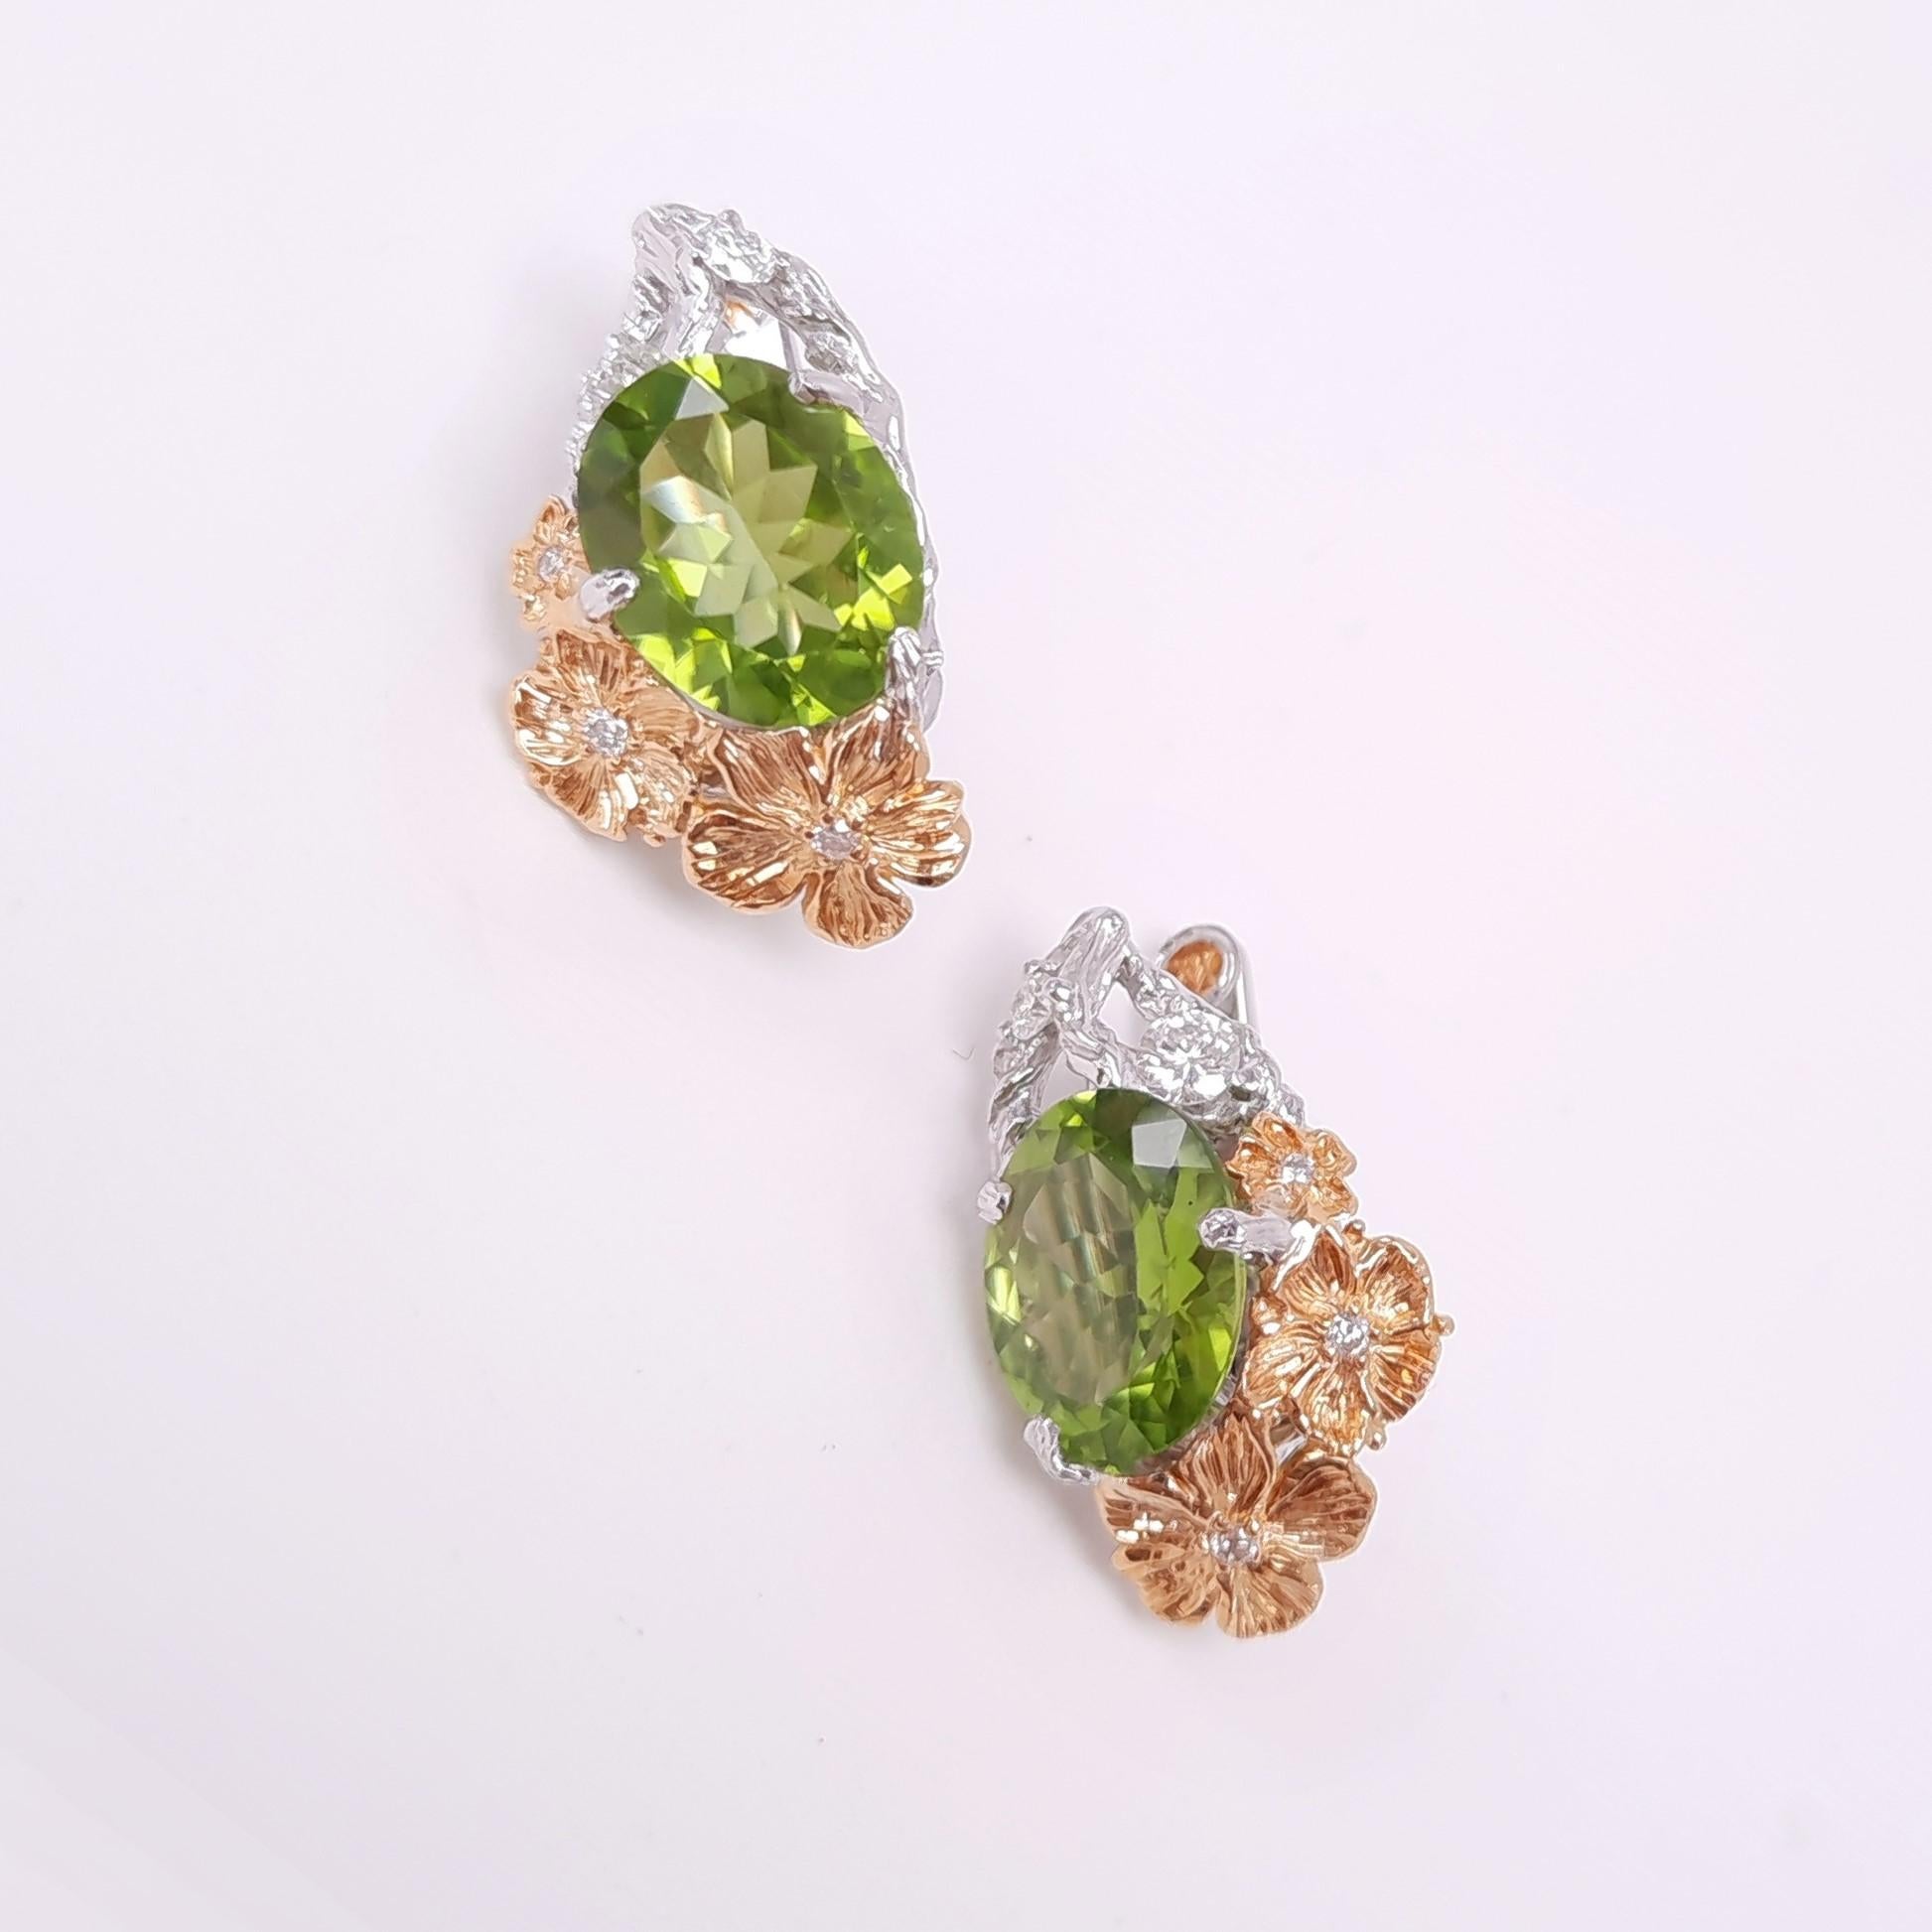 Artistically crafted in 18K gold, MOISEIKIN's Peridot Earrings are inspired by Van Gogh's iconic Impressionist style. The wearable art pieces encapsulating the essence of nature's beauty and the magic of artistic genius cheer your mood and add